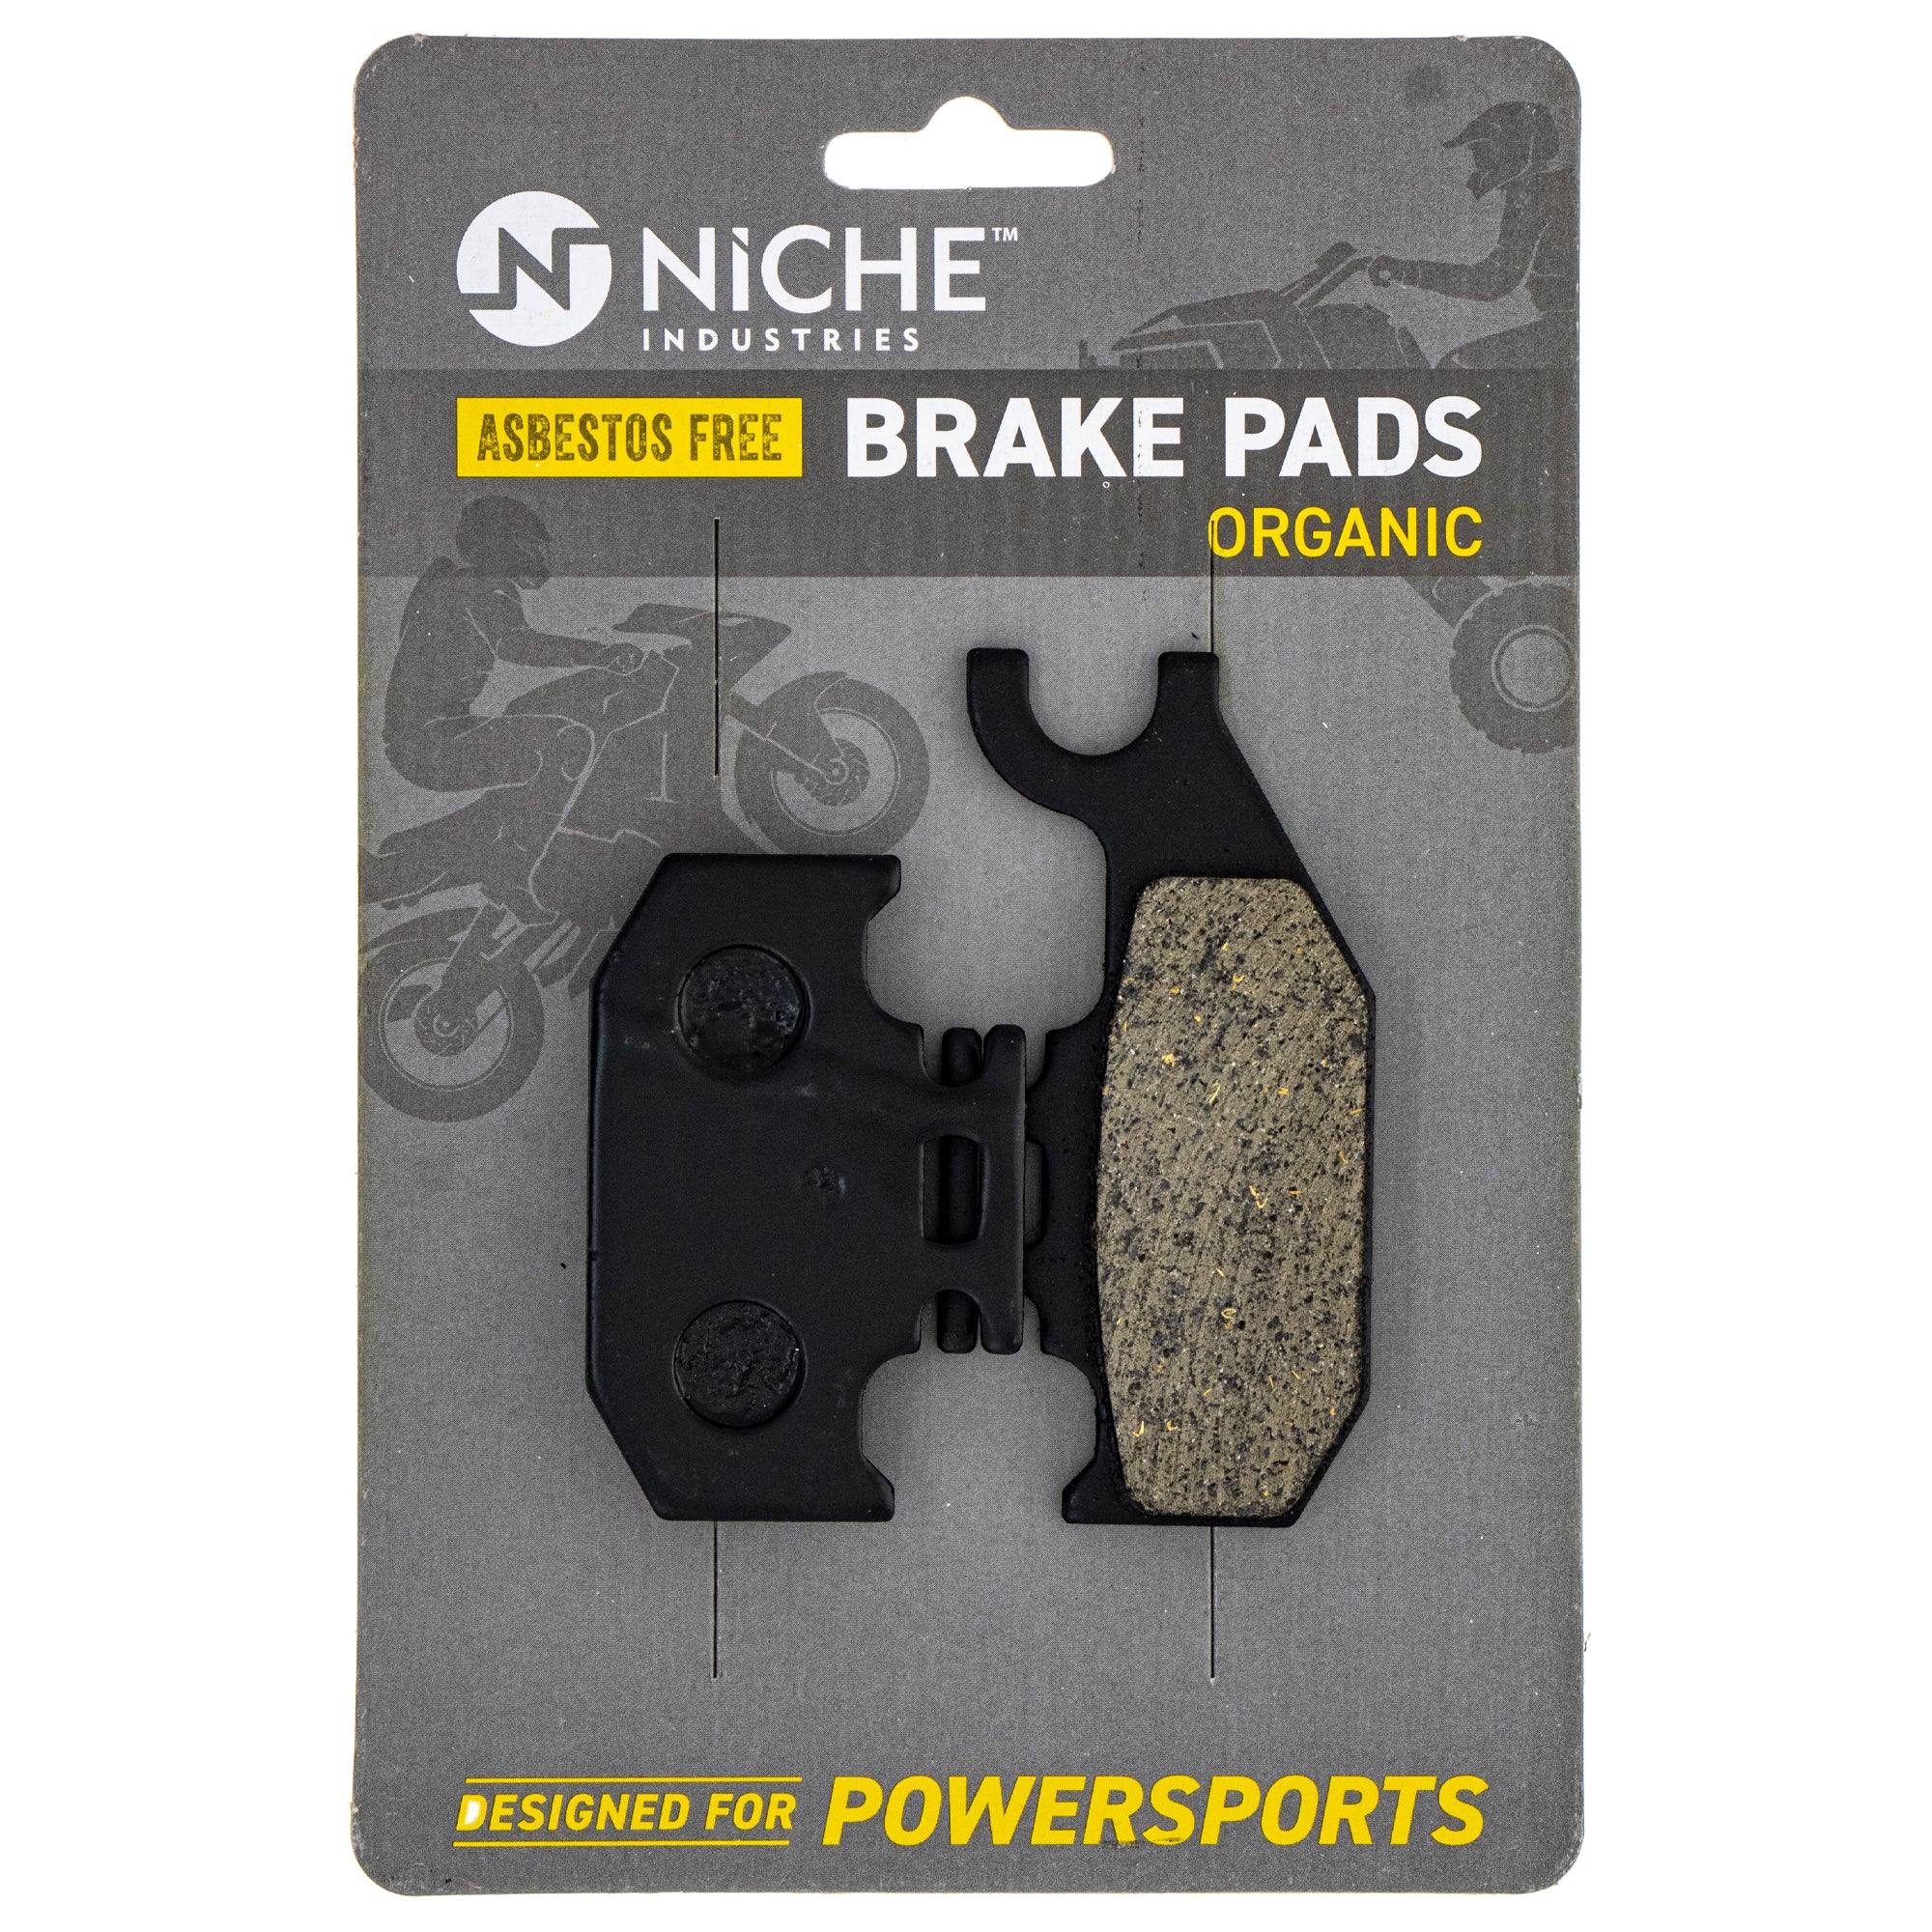 NICHE MK1001573 Brake Pad Kit Front/Rear for BRP Can-Am Ski-Doo